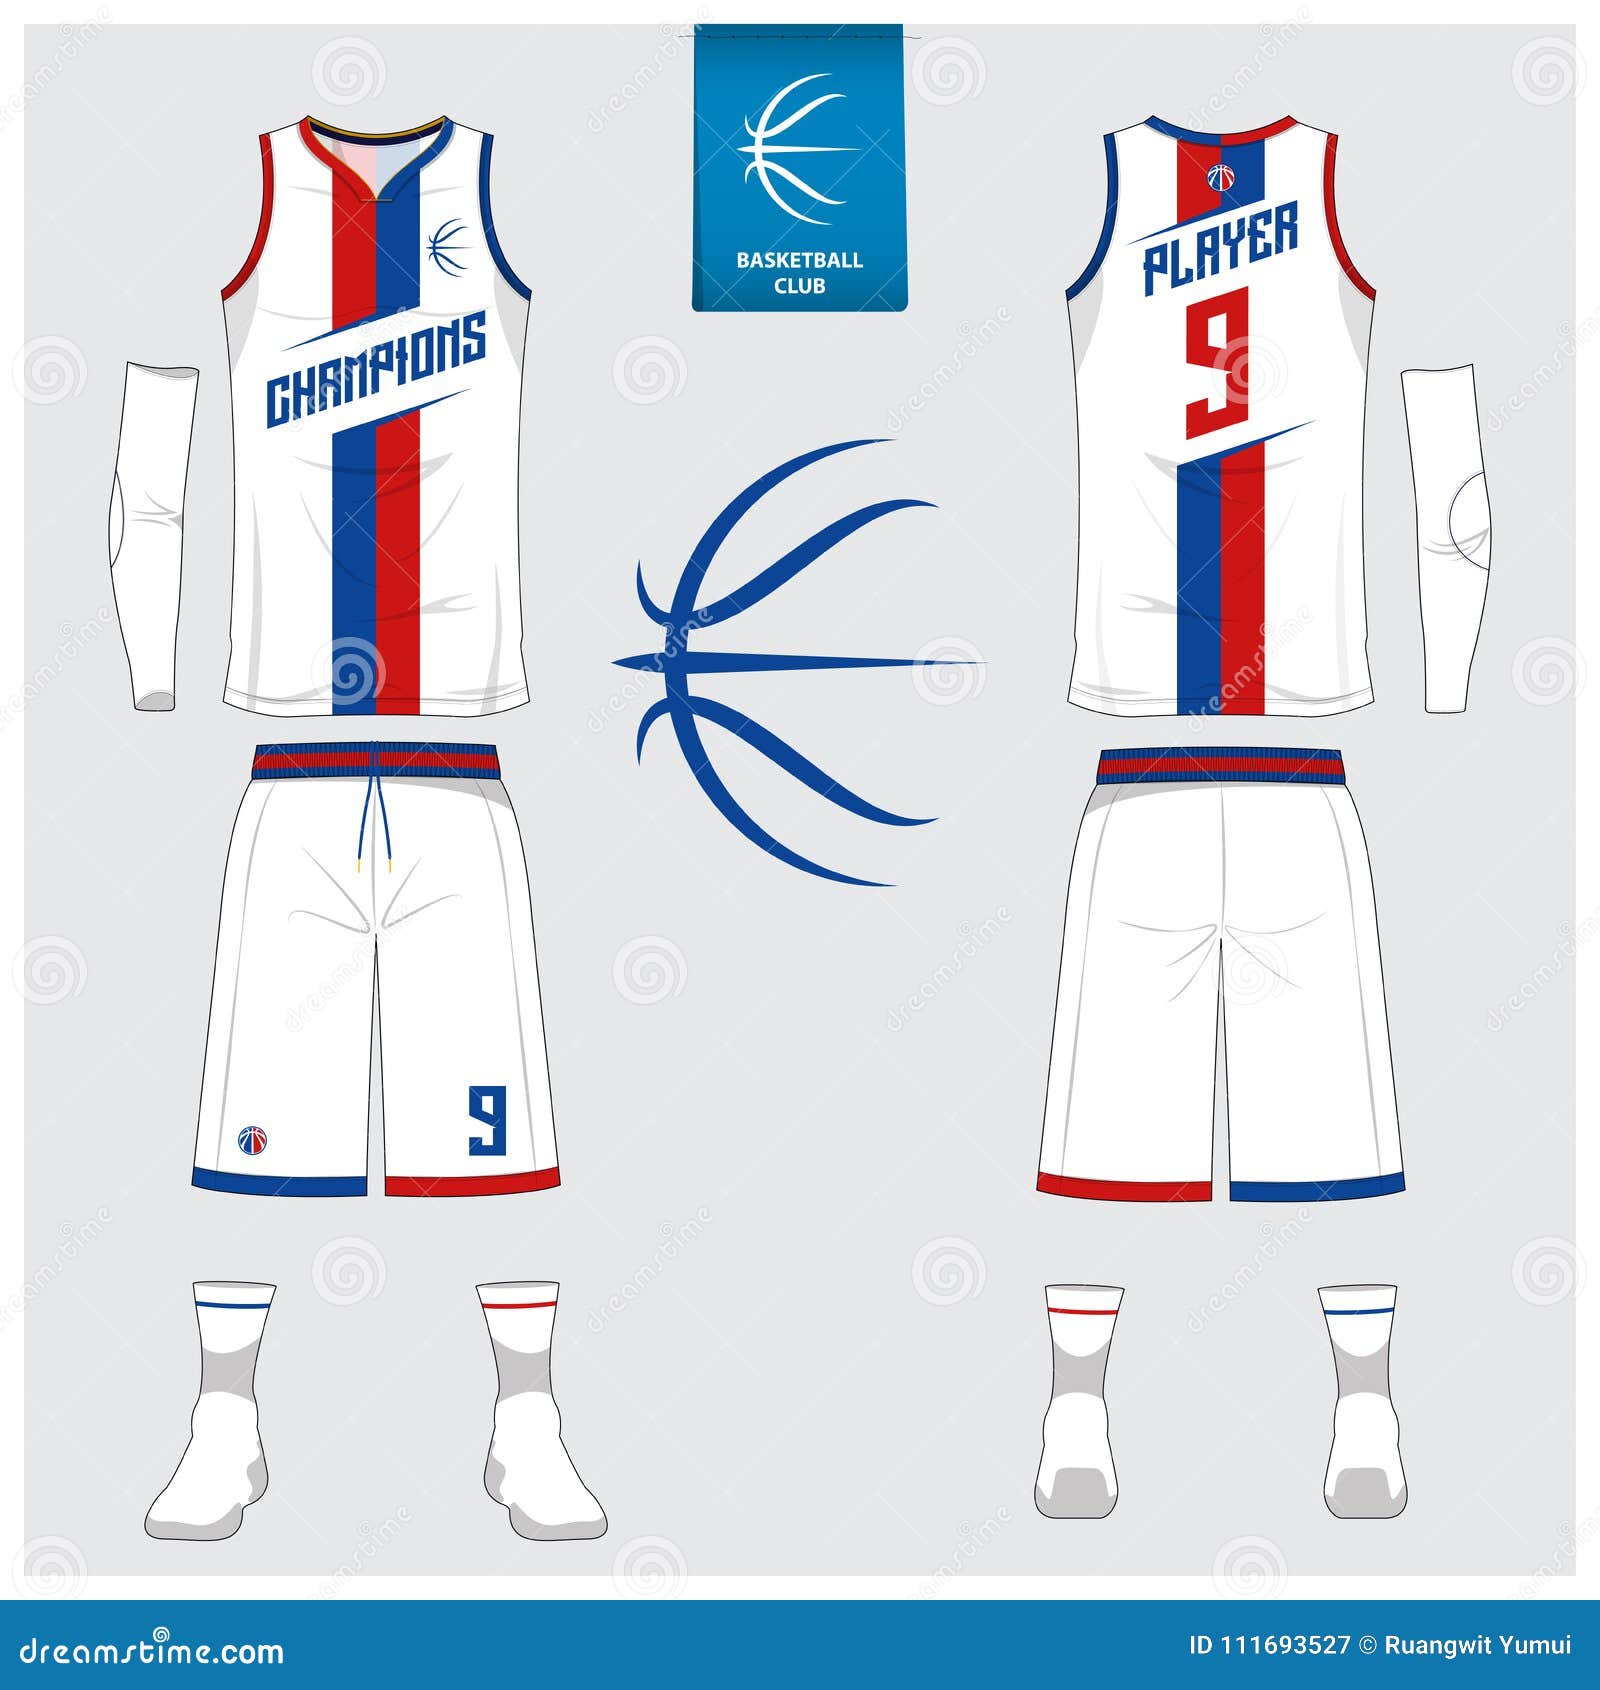 Image result for basketball jersey template  Basketball uniforms, Basketball  uniforms design, Best basketball jersey design